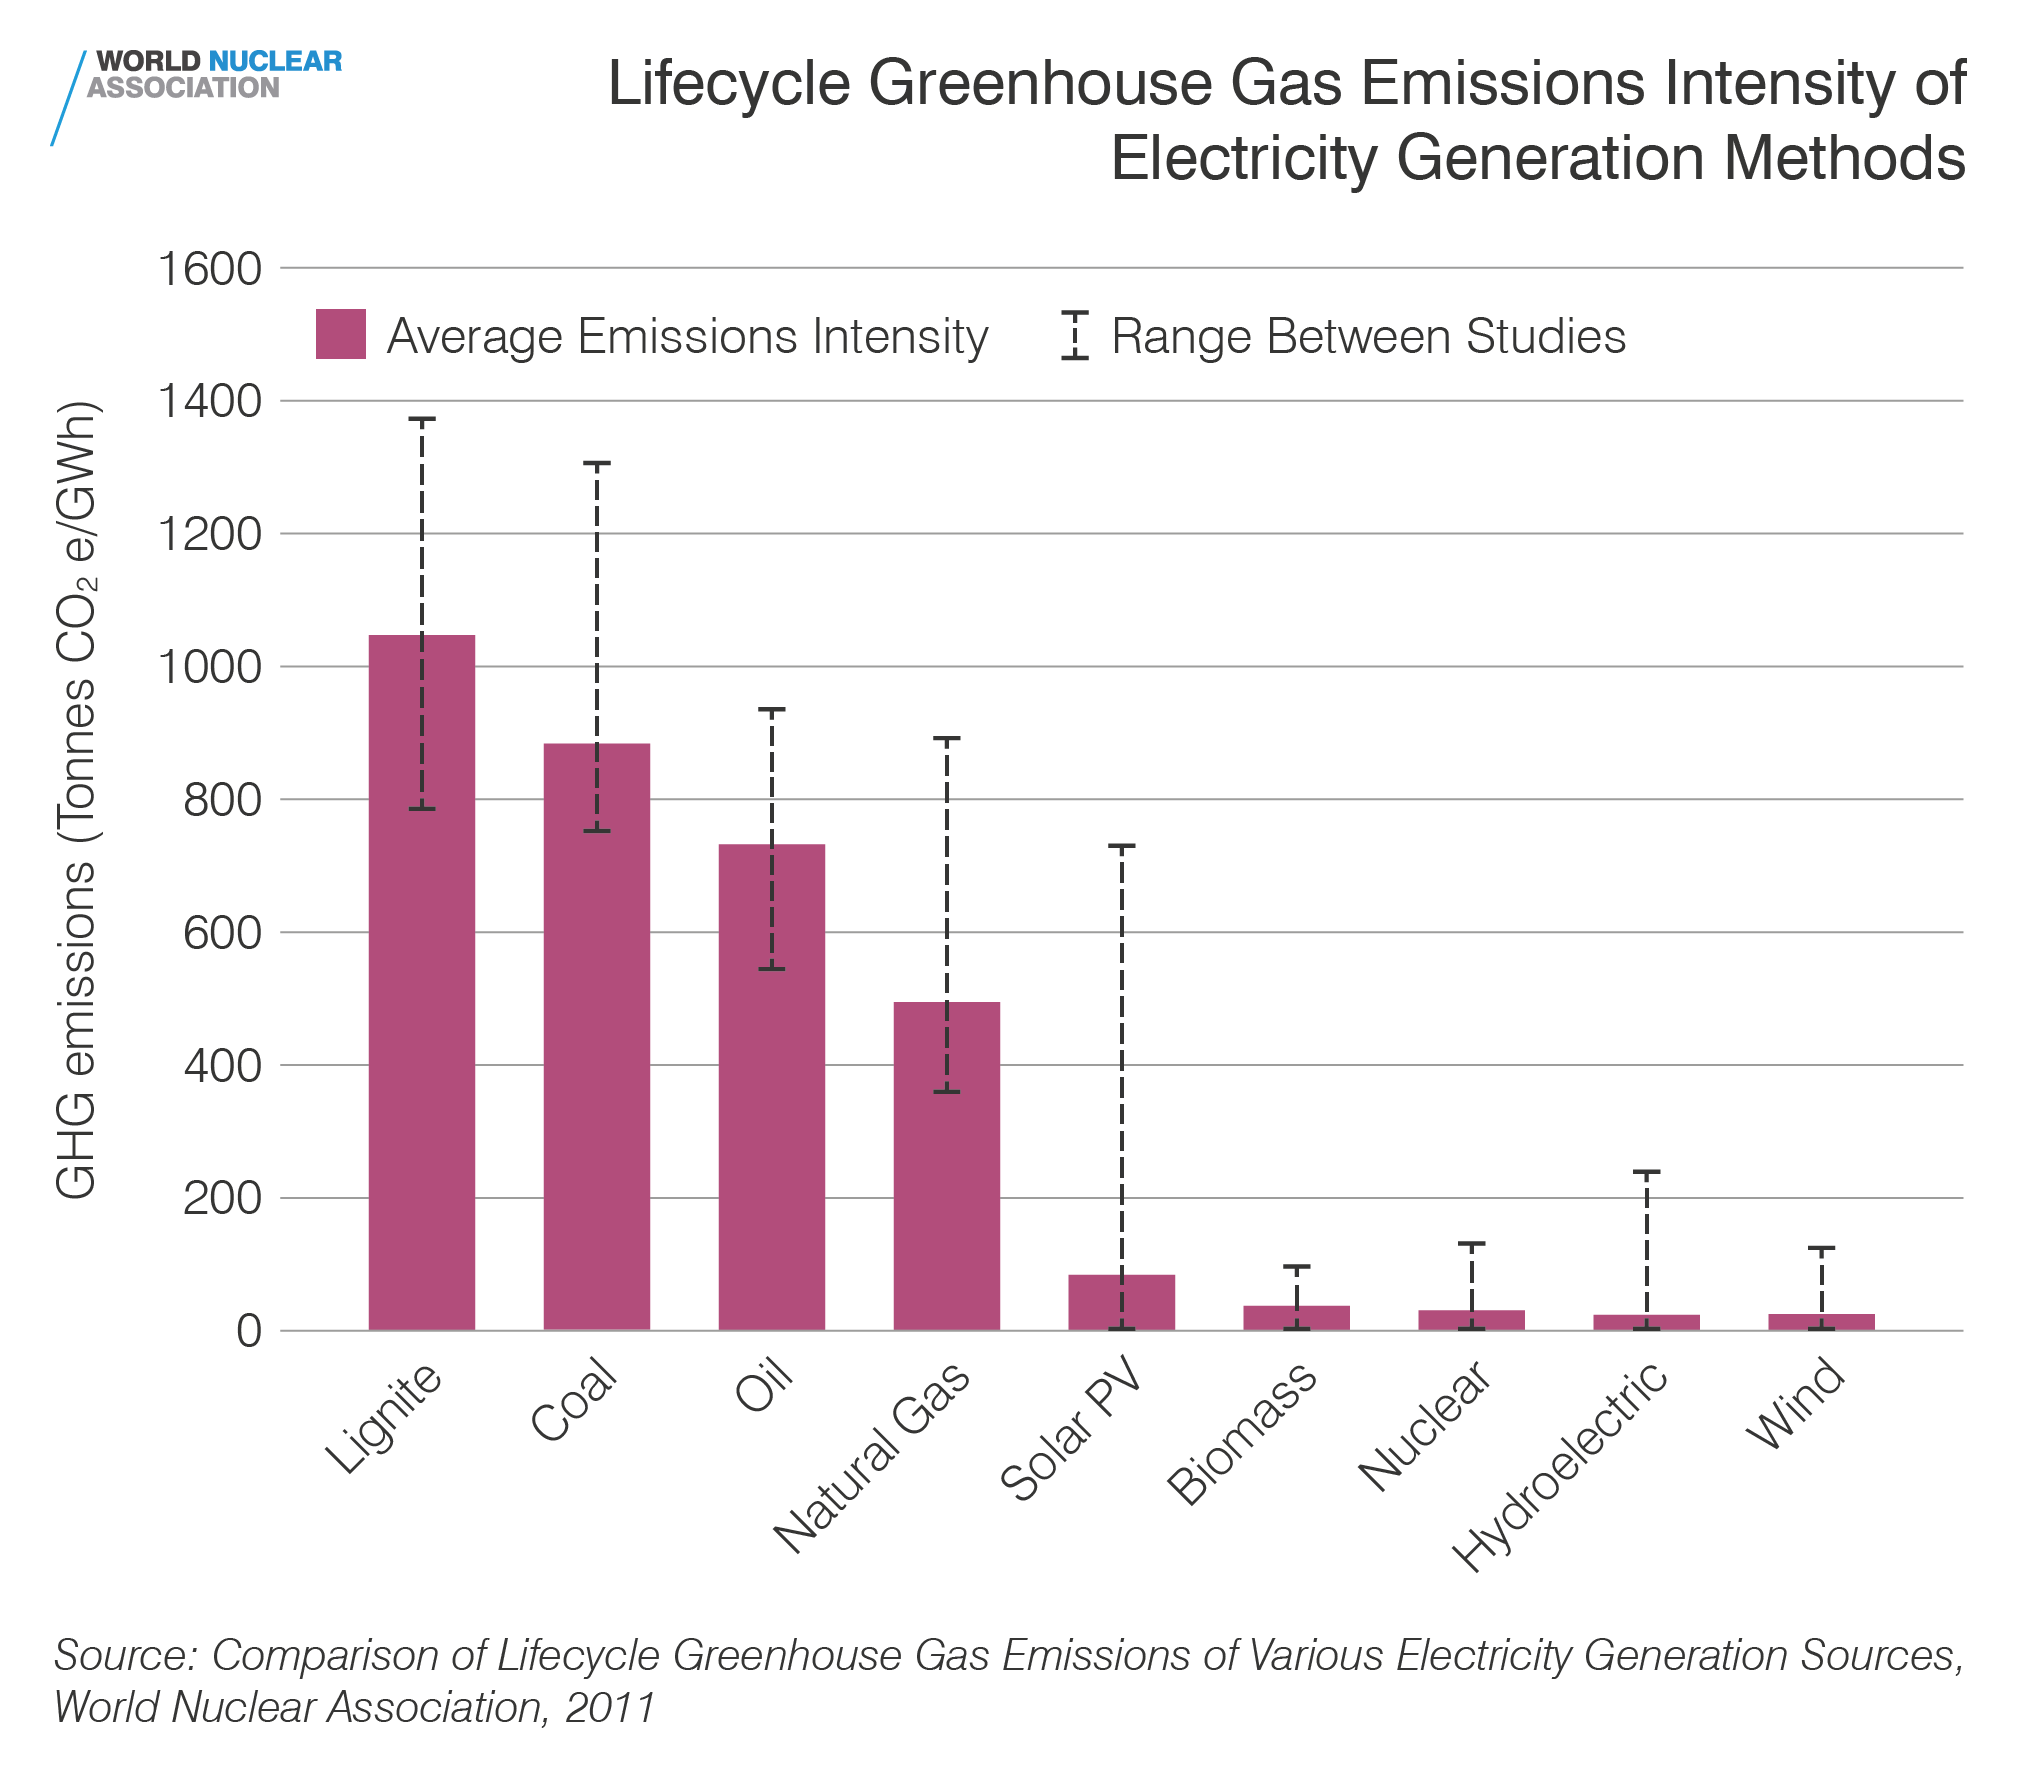 Lifecycle greenhouse gas emissions intensity of electricity generation methods